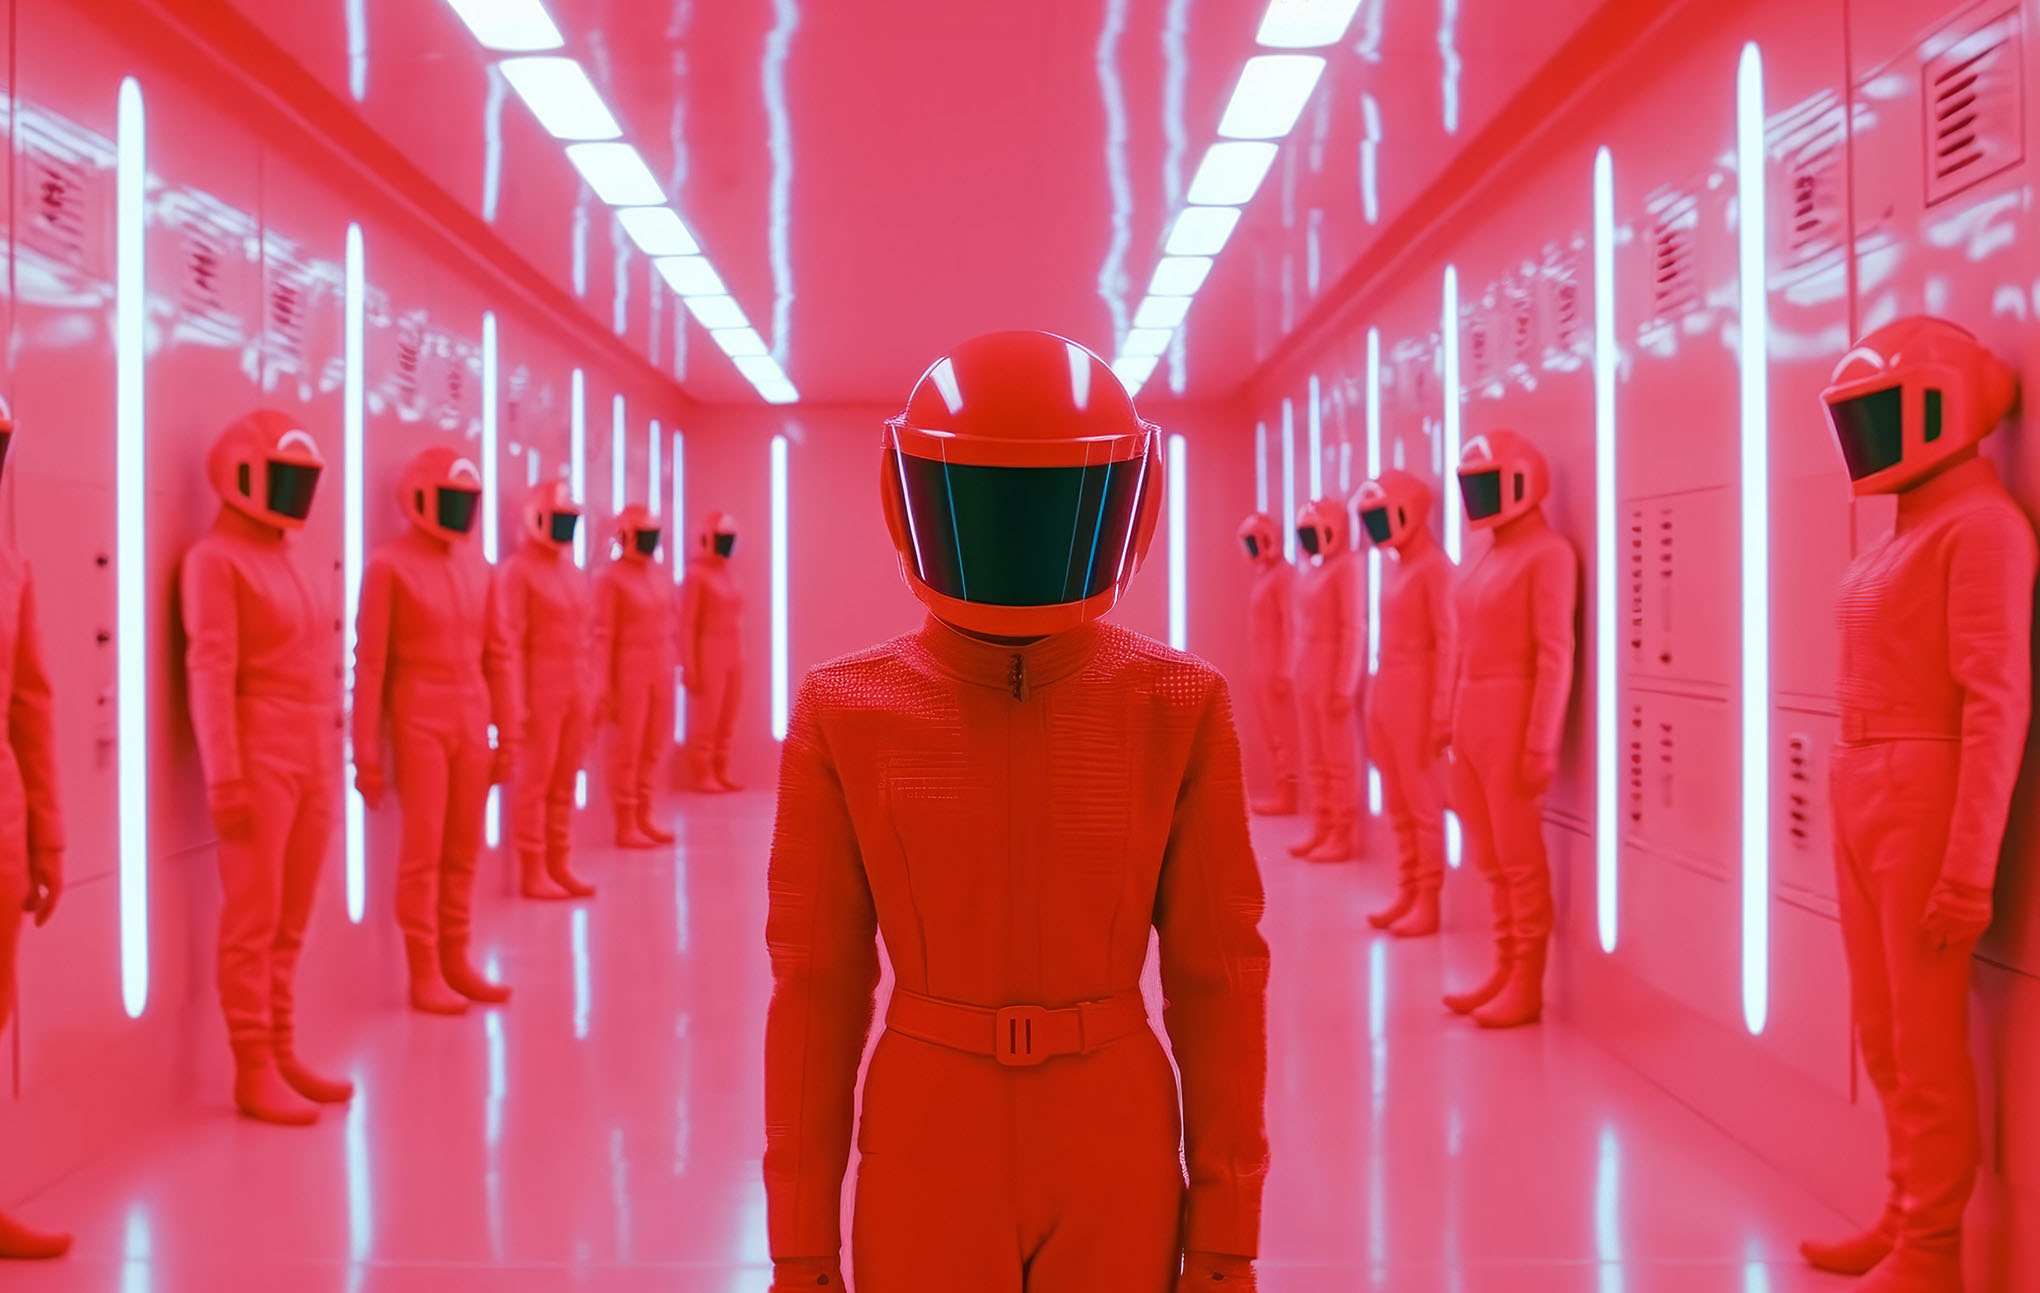 A person wearing a futuristic full-body red suit and helmet stands central in a corridor lined with similarly dressed people, all against a striking red-lit background with a symmetrical, high-tech design.